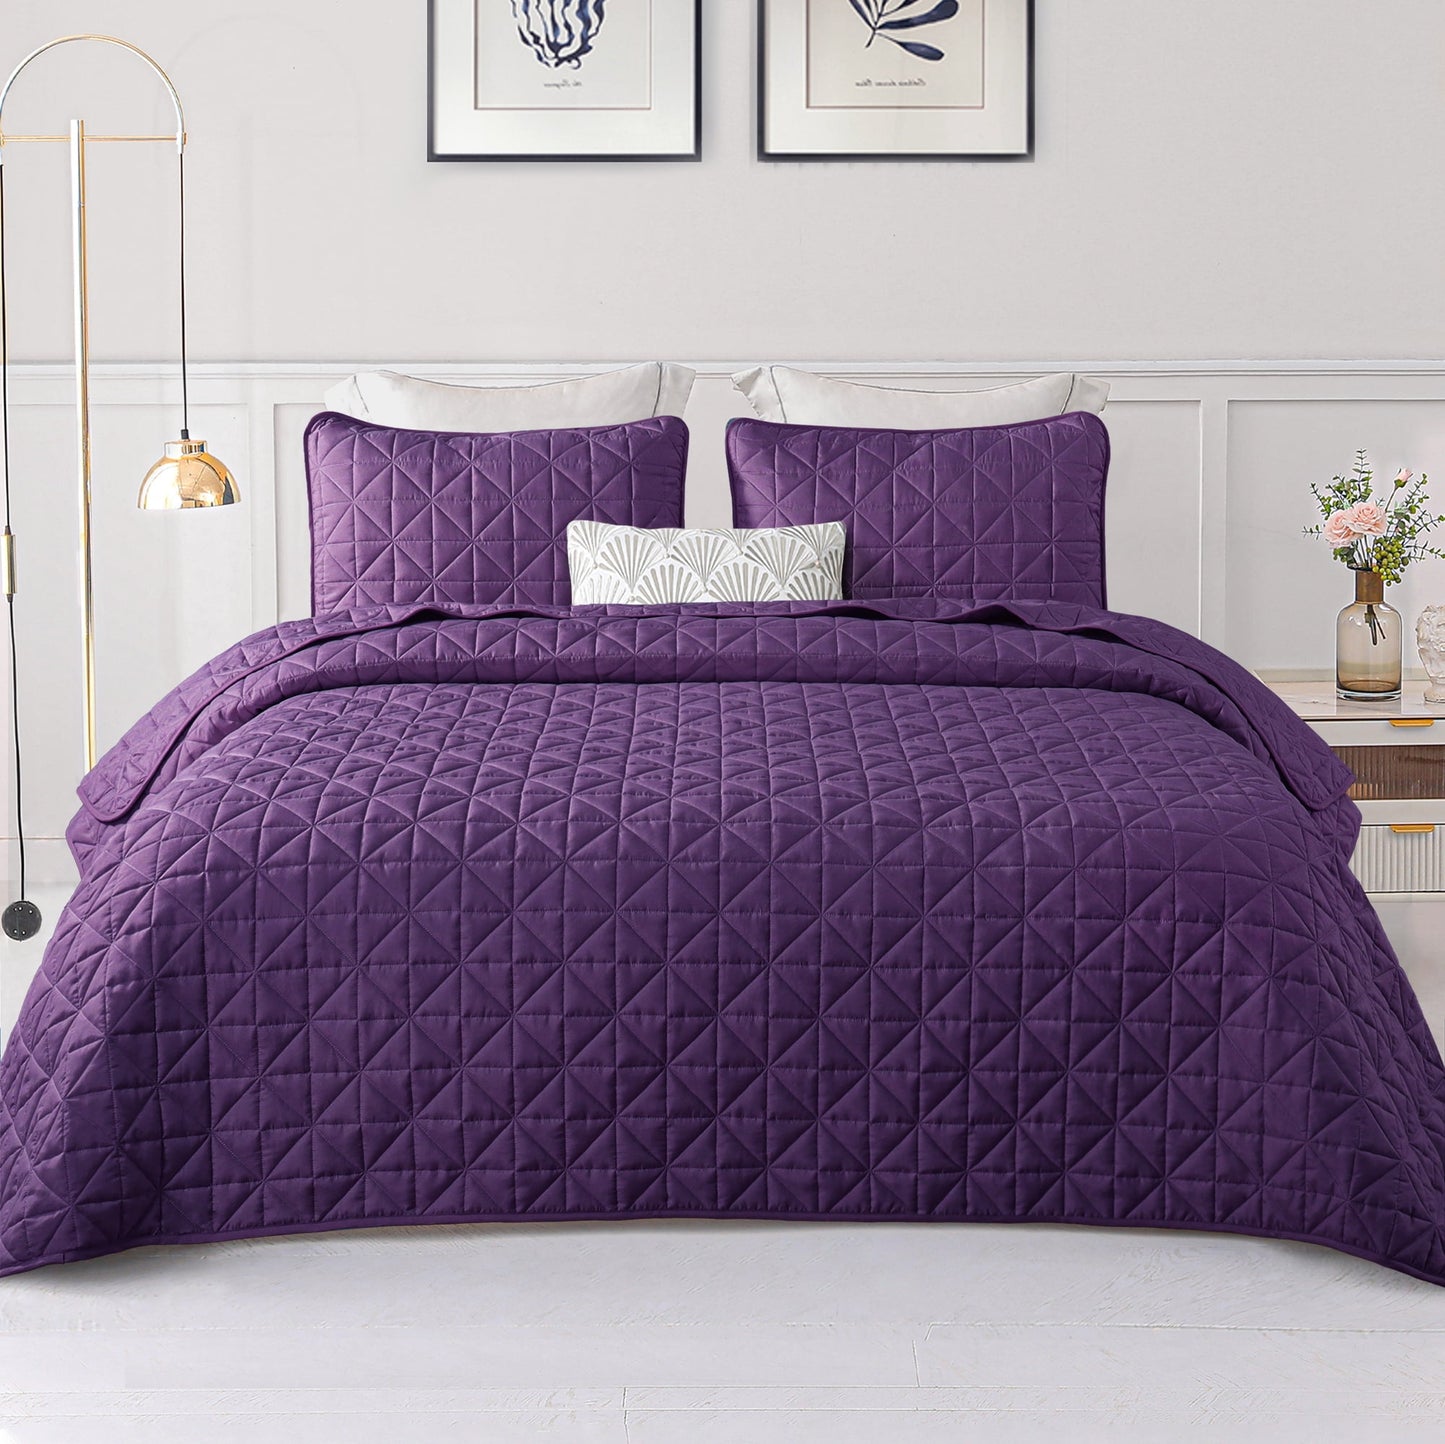 Exclusivo Mezcla King Size Quilt Bedding Set for All Seasons, Lightweight Soft Purple Quilts King Size Bedspreads Coverlets Bed Cover with Geometric Stitched Pattern, (1 Quilt, 2 Pillow Shams)